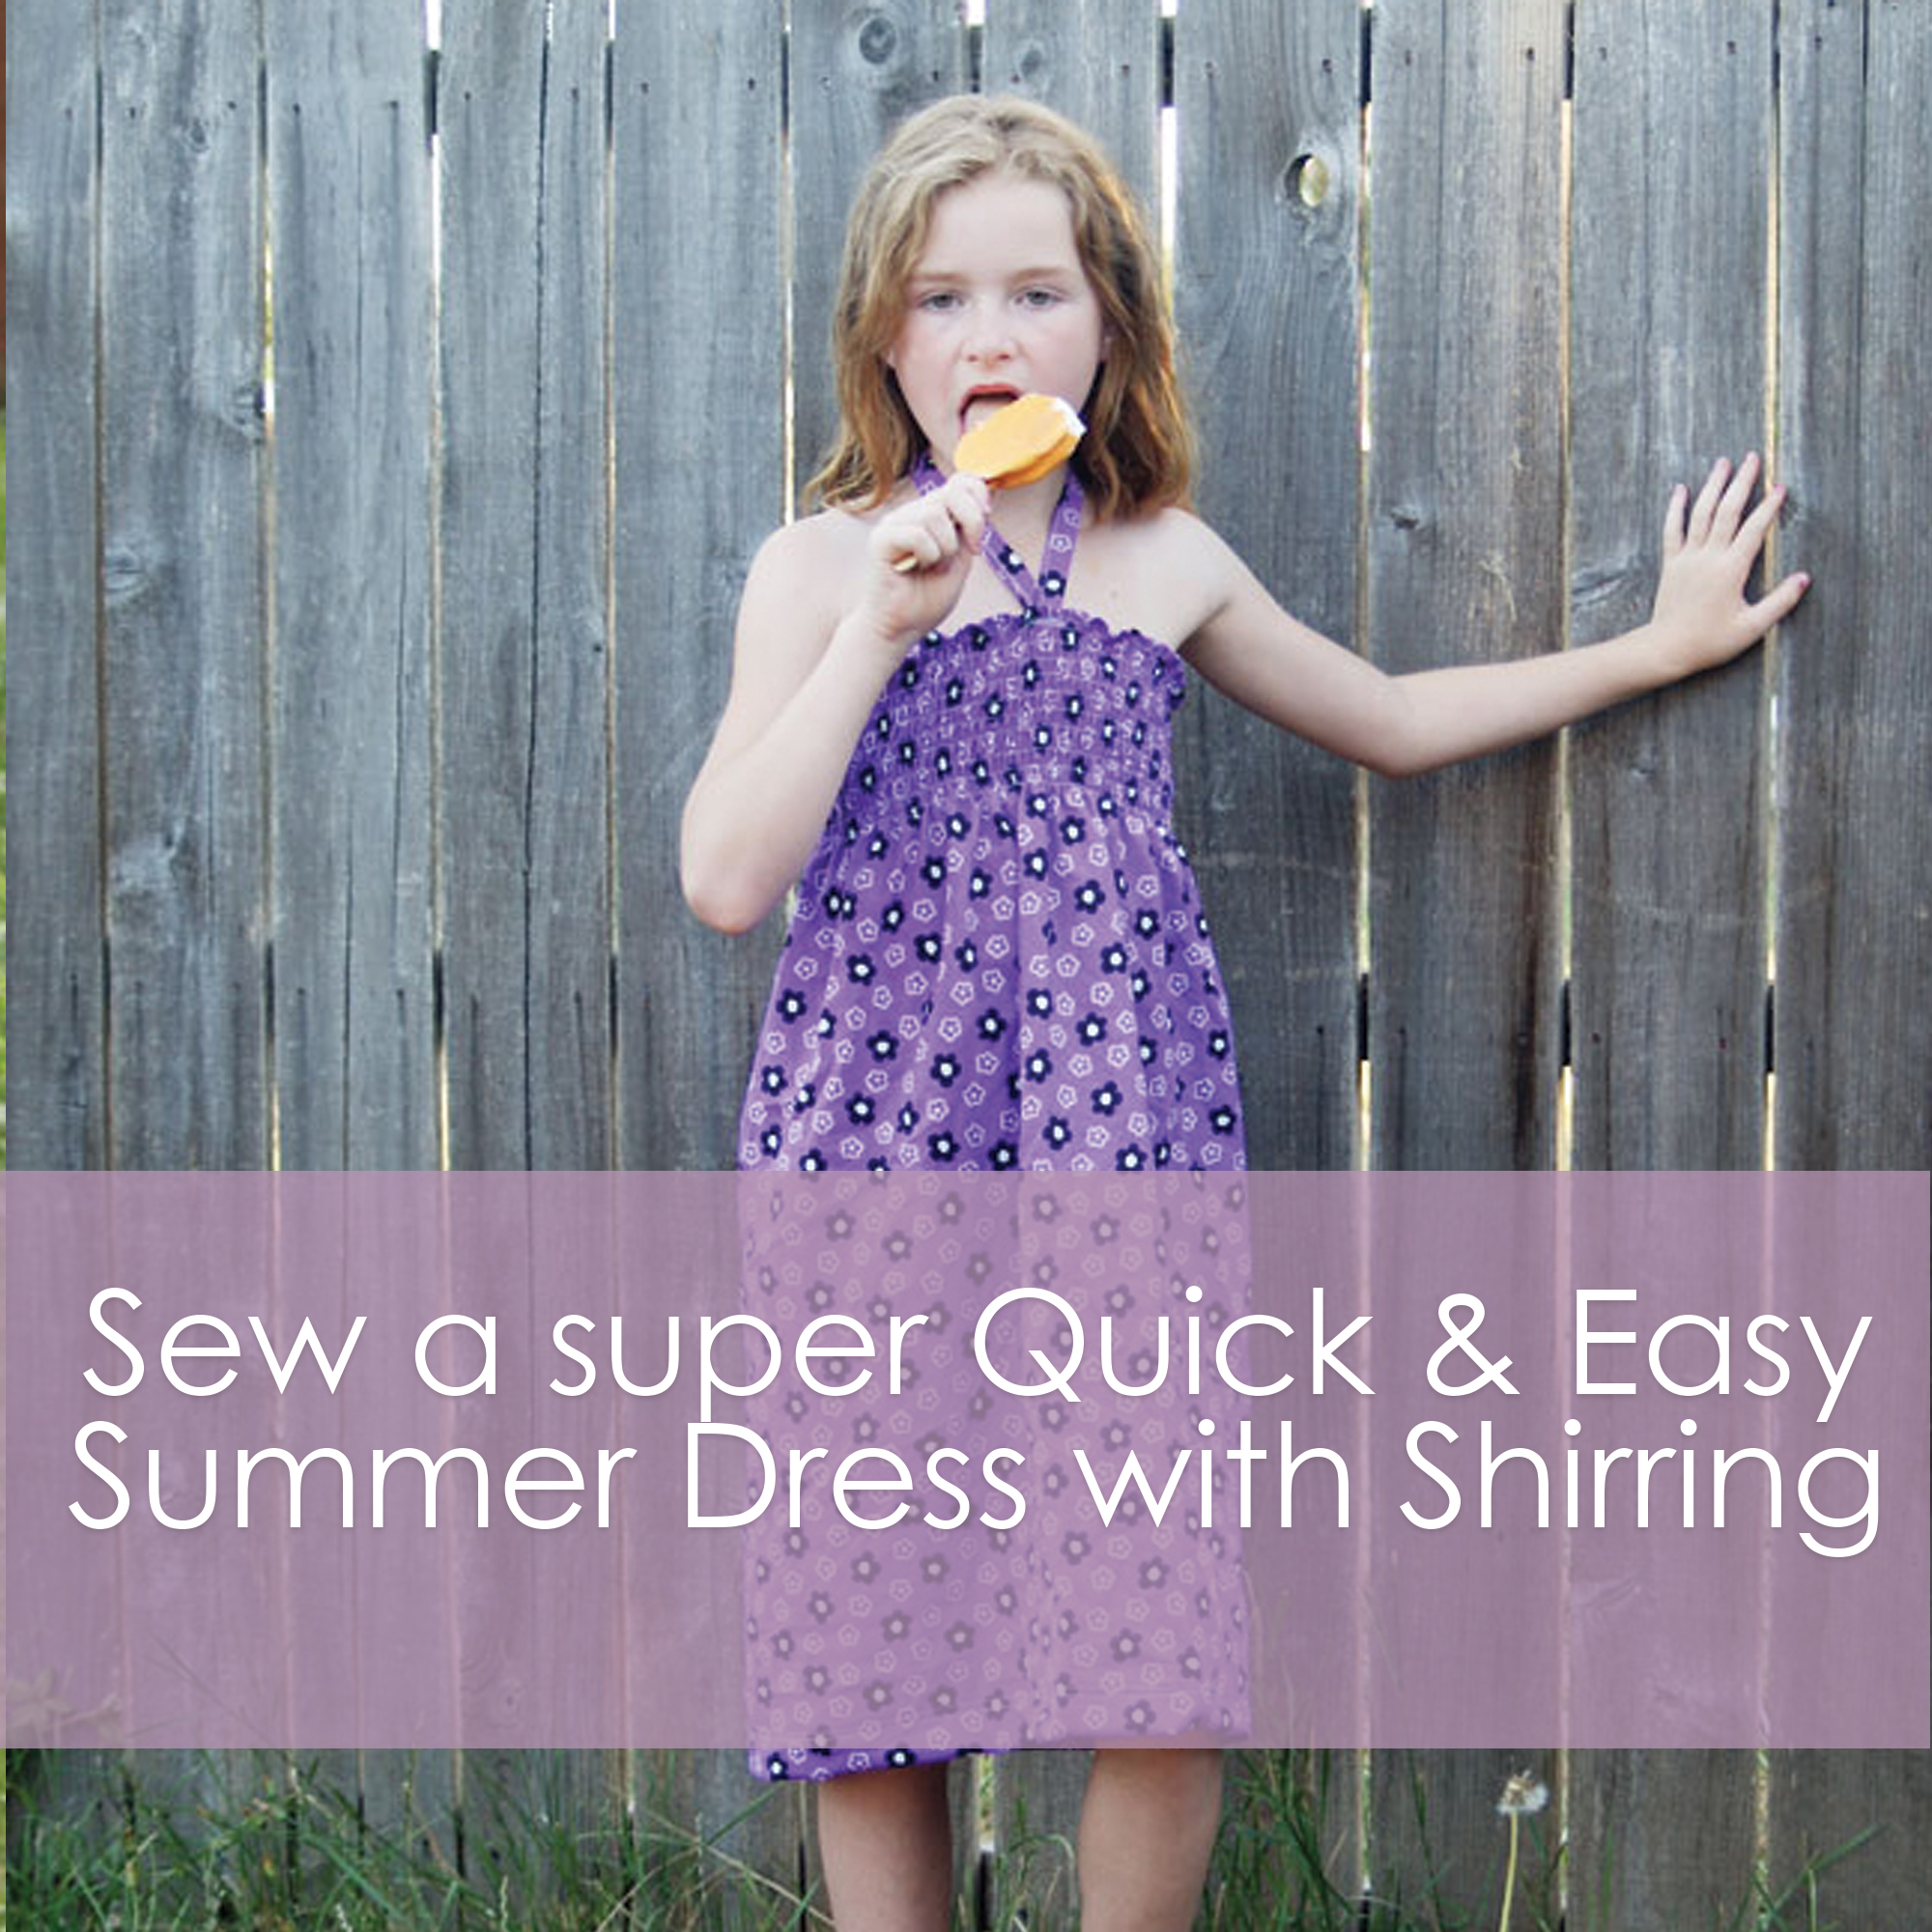 How to Sew a Super Easy & Quick Summer Dress with Shirring – Muse